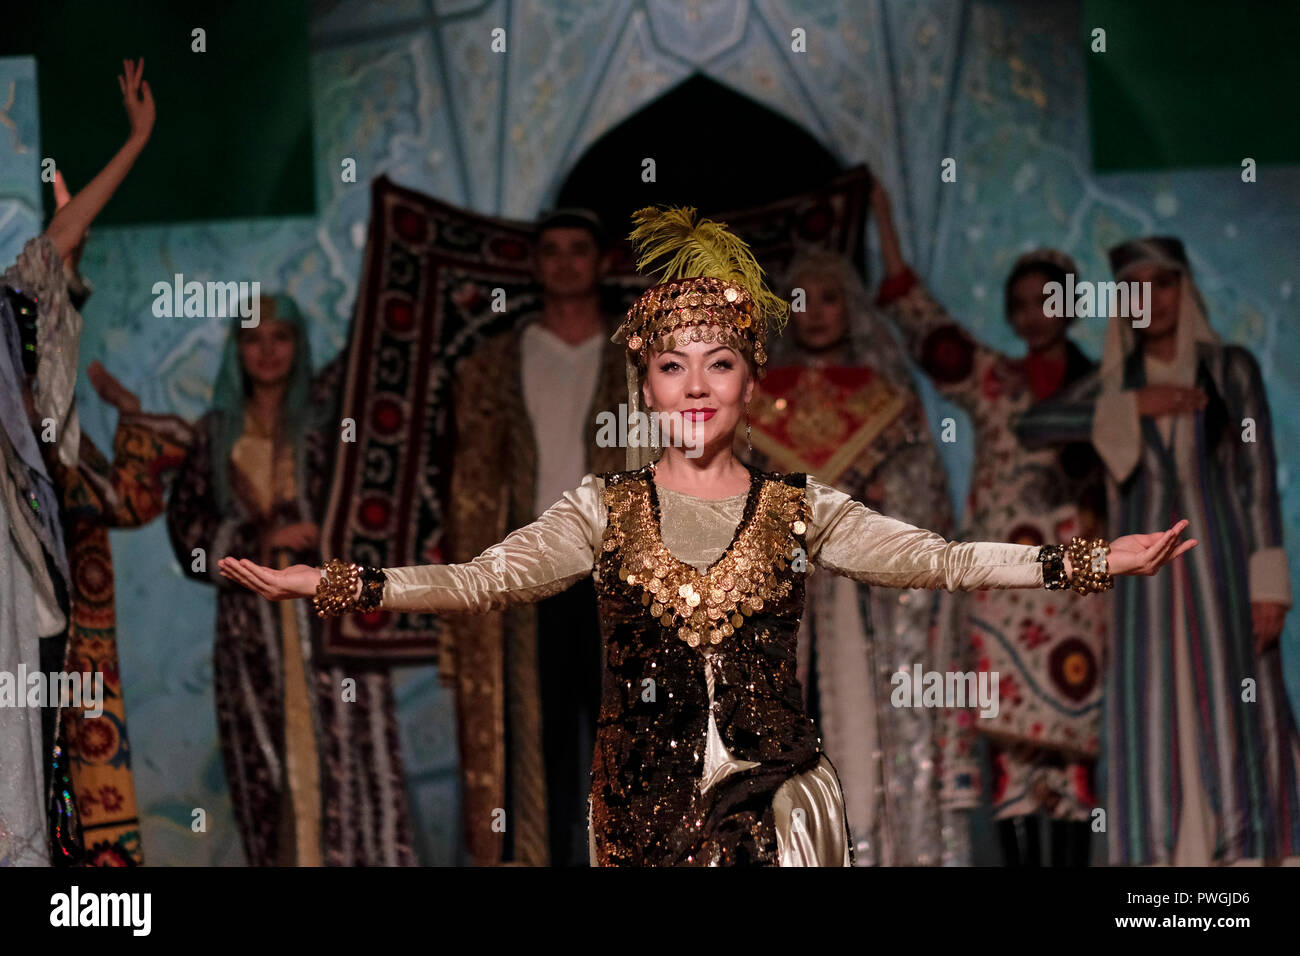 Dancers wearing historical costume during an ethno-cultural performance staged by “El Merosi” ('The People's Heritage') the theater of historical costumes working since 2005 in the city of Samarkand alternatively Samarqand of the Timurid dynasty in Uzbekistan Stock Photo